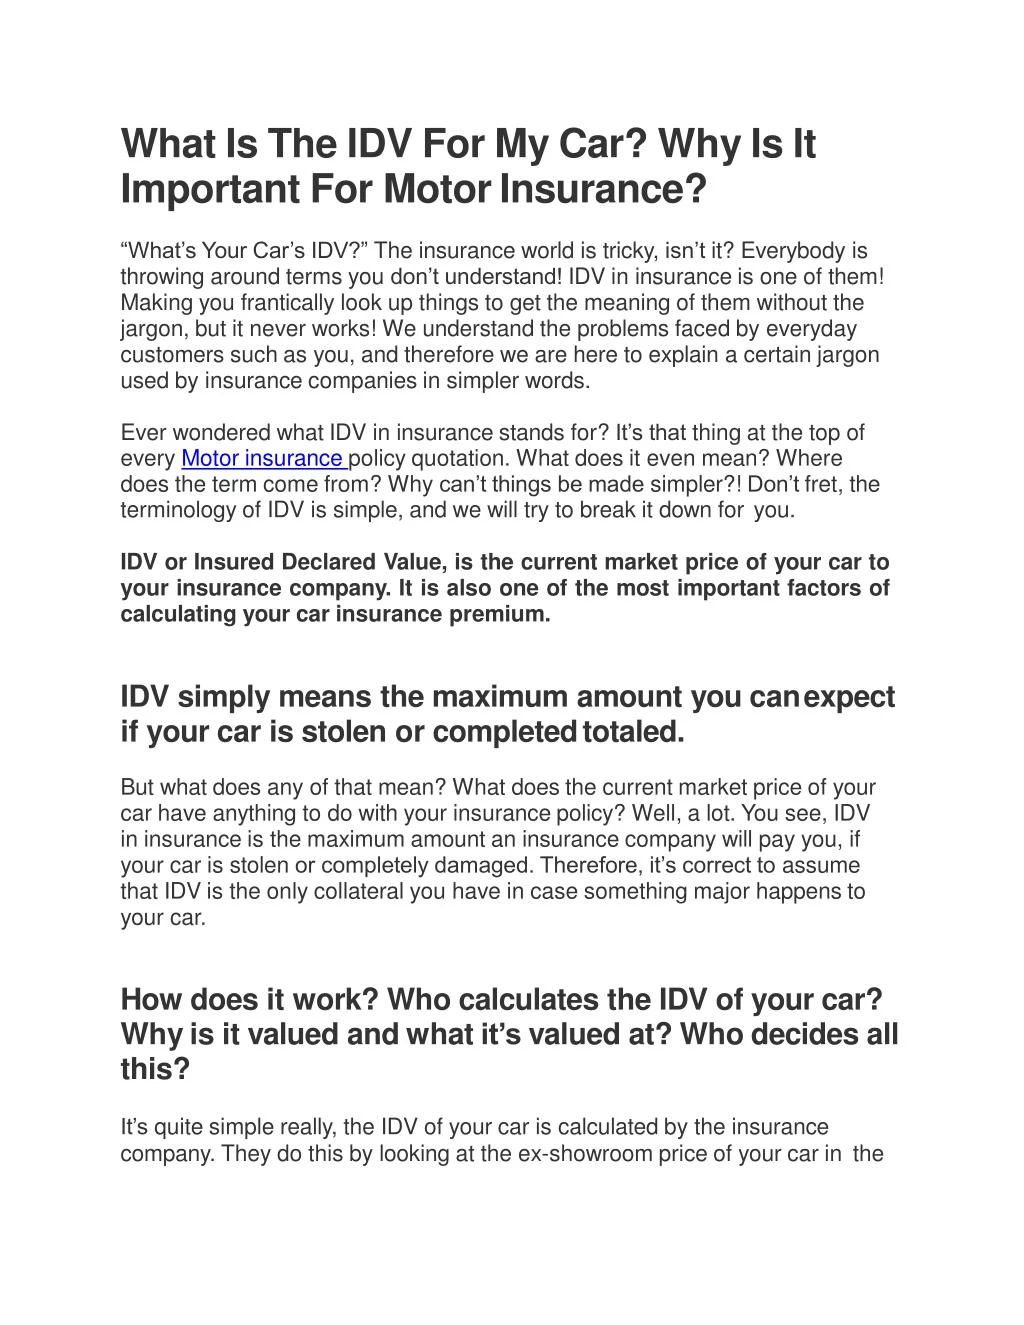 what is the idv for my car why is it important for motor insurance